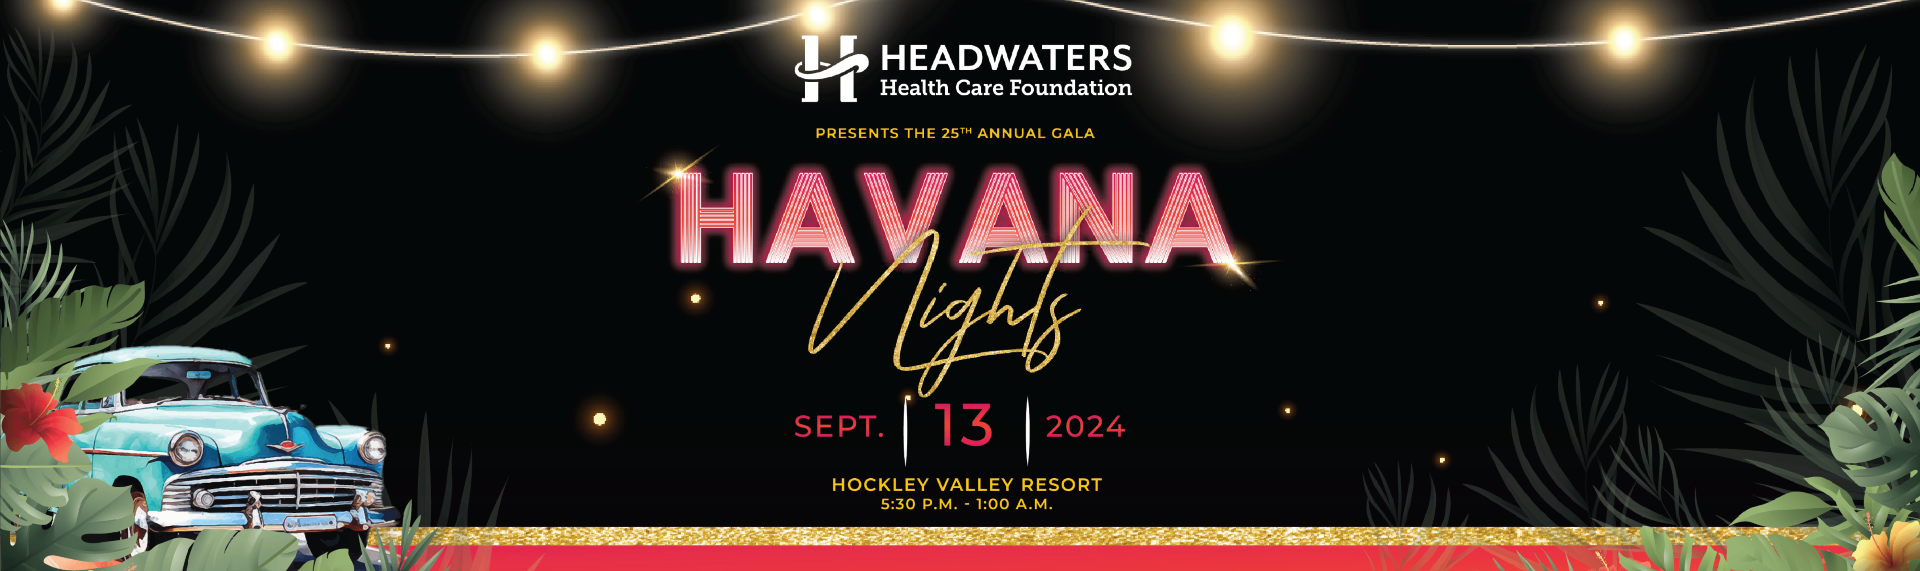 Graphic featuring Havana themes assets advertising the details of Headwaters Annual Gala  